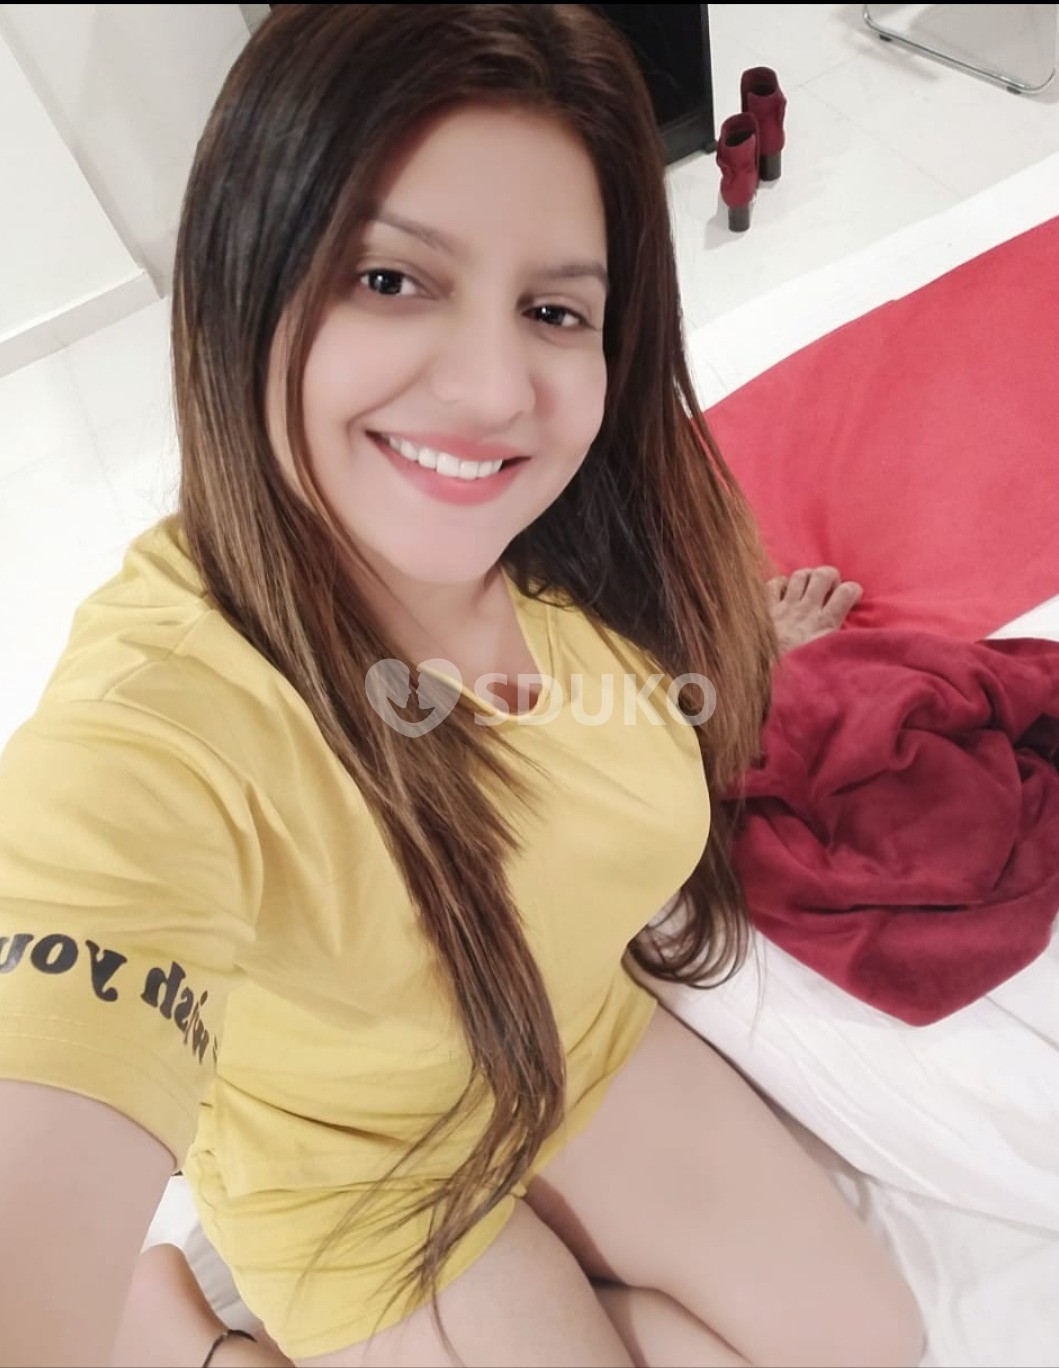 ADILABAD HOT AND HIGH PROFILE VIP CALL 24 X 7 HRS AVAILABLE ANAL ORAL BLOWJOB AVAILABLE ANYTIME CALL ME